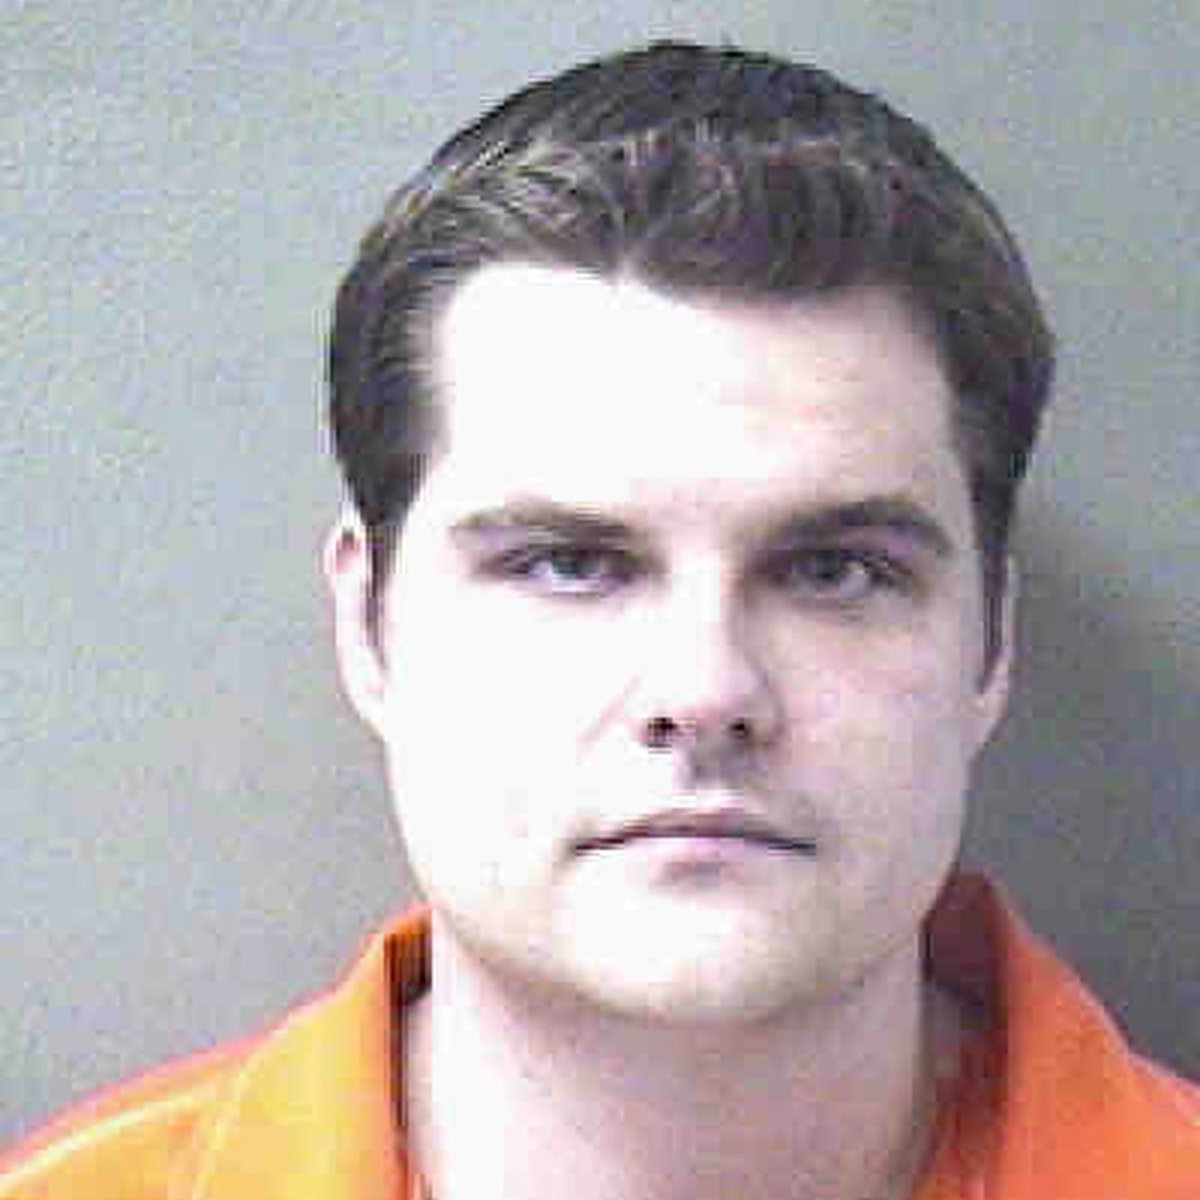 He received a DUI while driving his daddy’s BMU because ofc he did.But he also supports deporting every undocumented immigrant during the pandemic because ofc he does! https://www.orlandoweekly.com/Blogs/archives/2020/04/29/florida-congressman-matt-gaetz-wants-to-use-the-coronavirus-pandemic-to-deport-immigrants